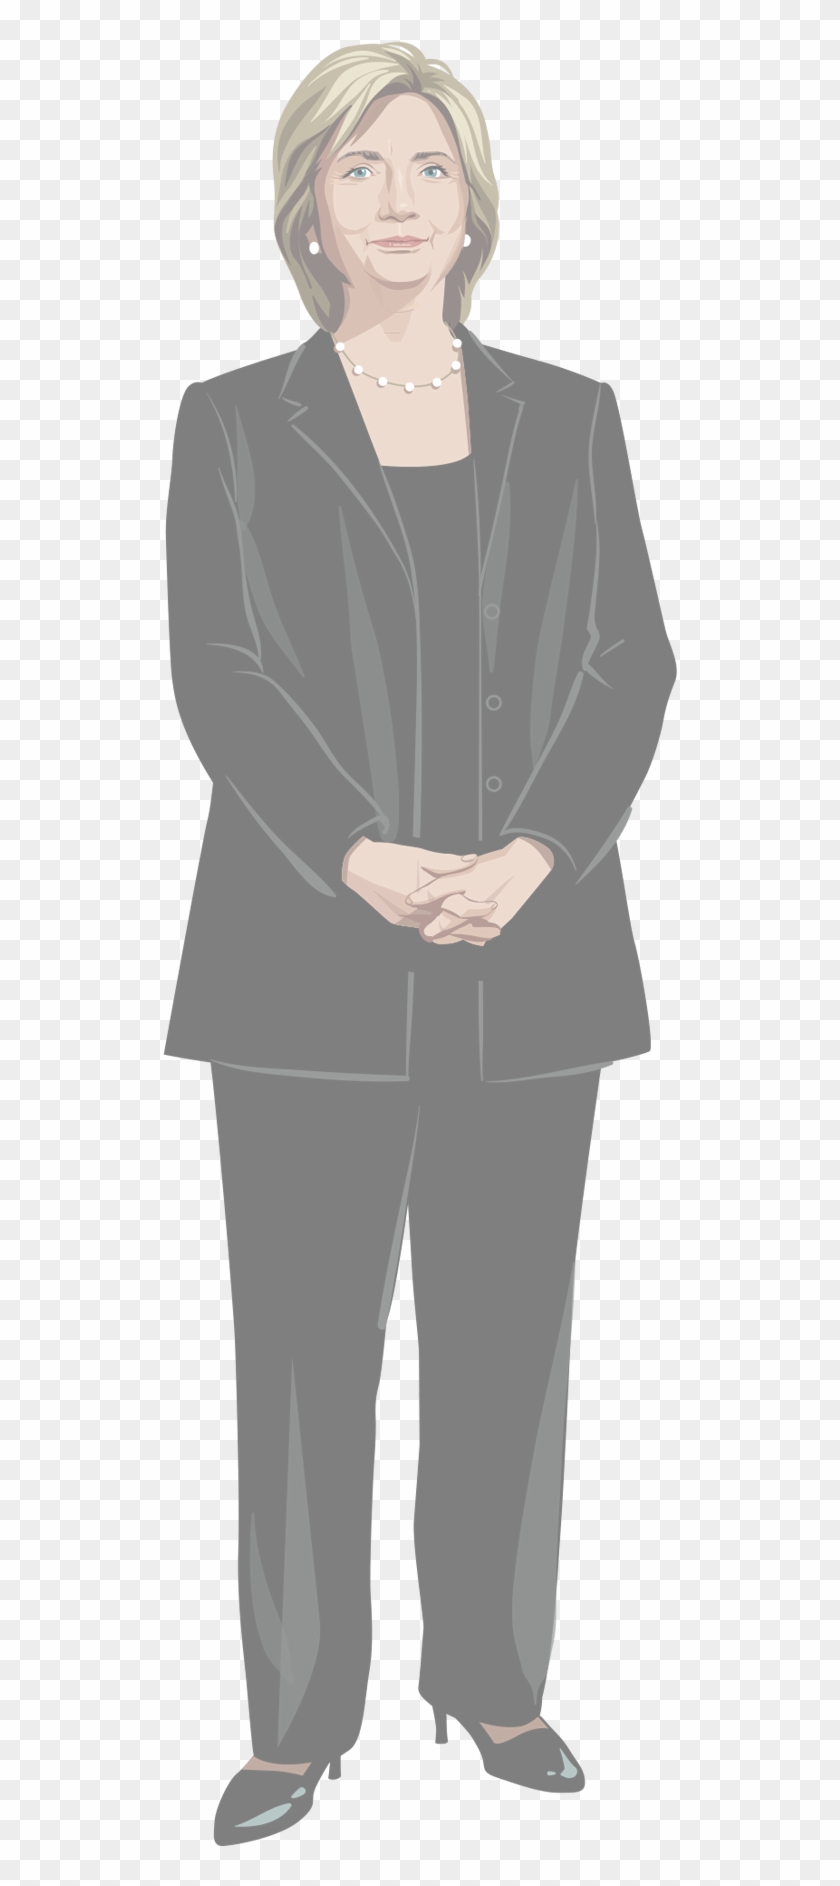 Choose Another Candidate - Full Body Hillary Clinton Clipart #2264337